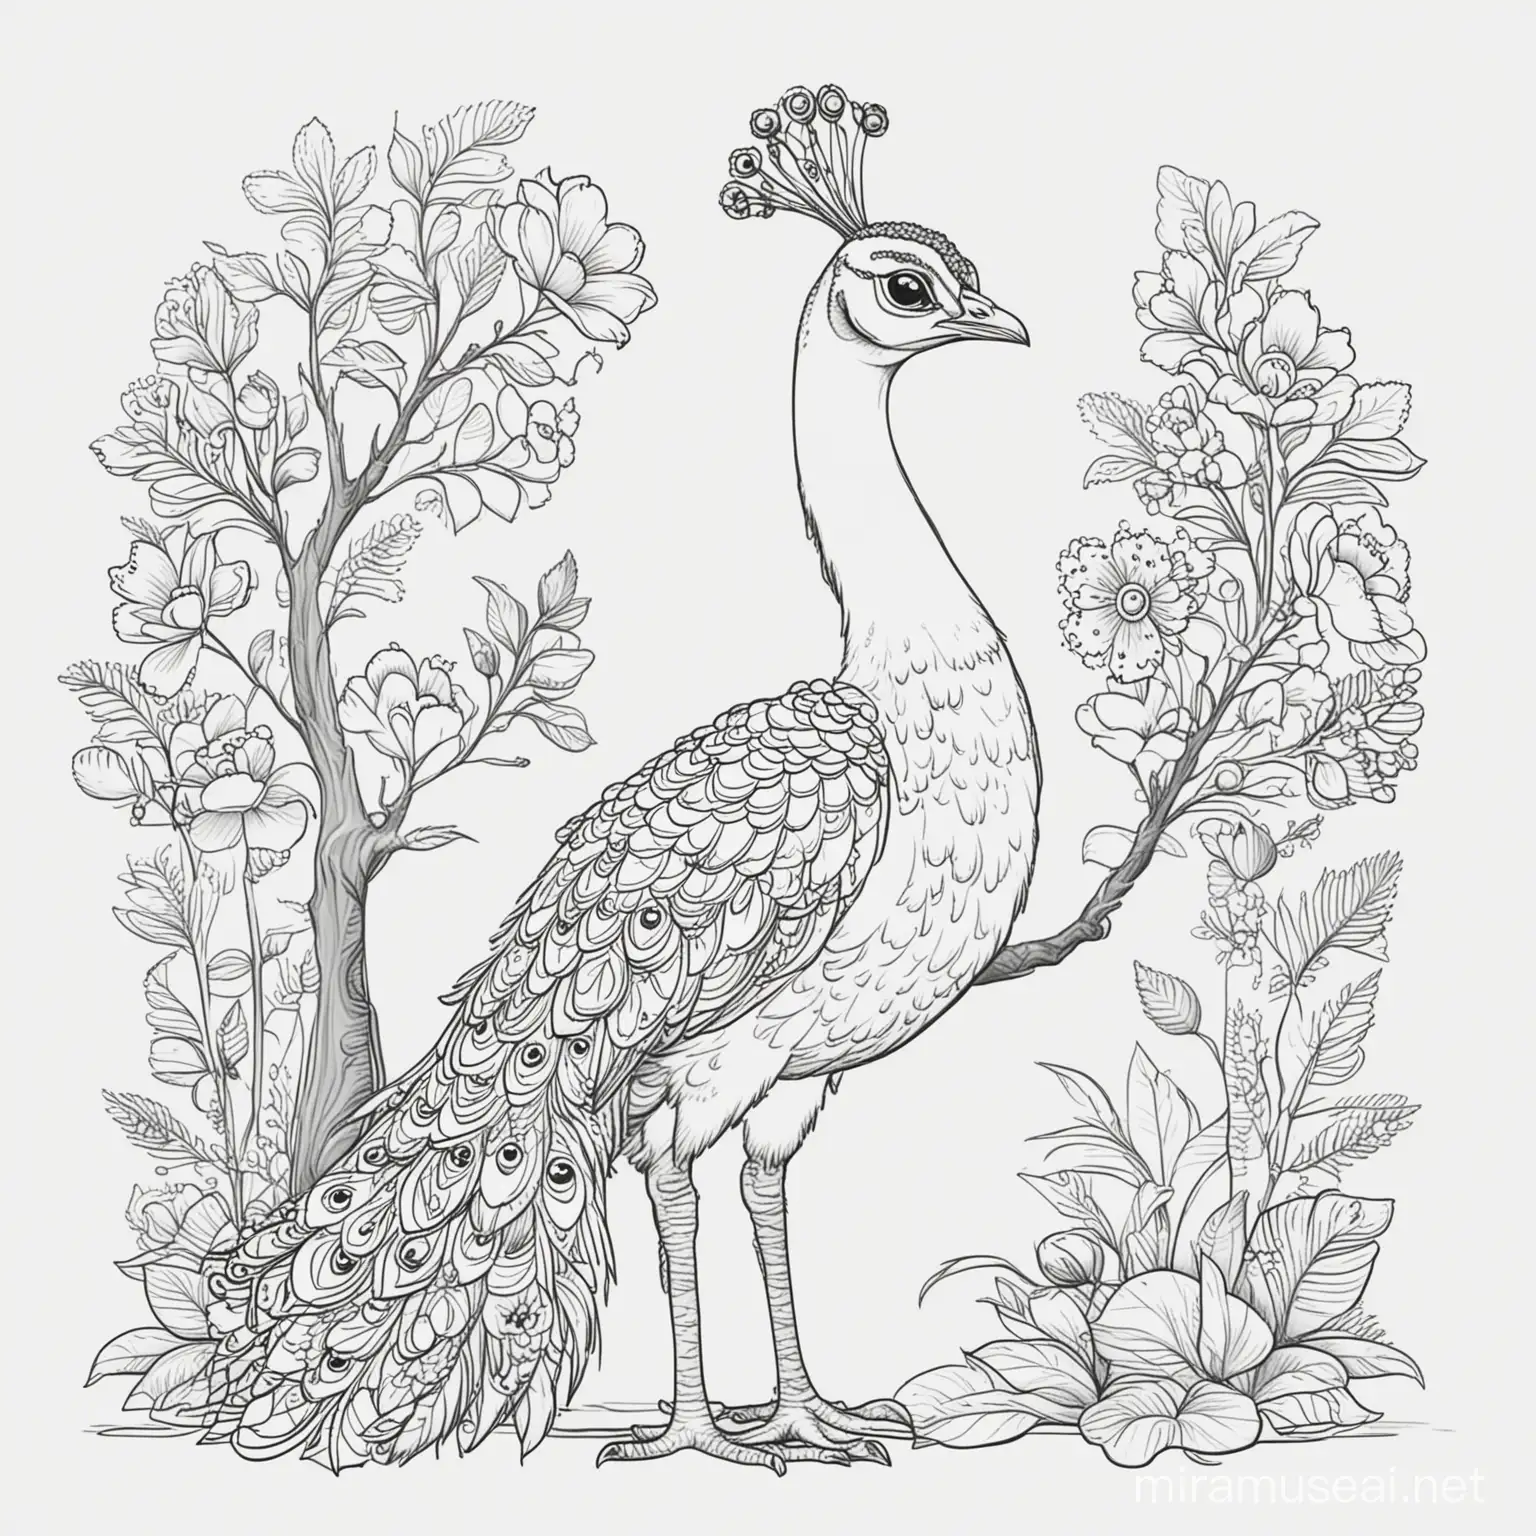 coloring page, cartoon peacock with flowers and a tree, black and white, white background, no shading, simple design, digital art